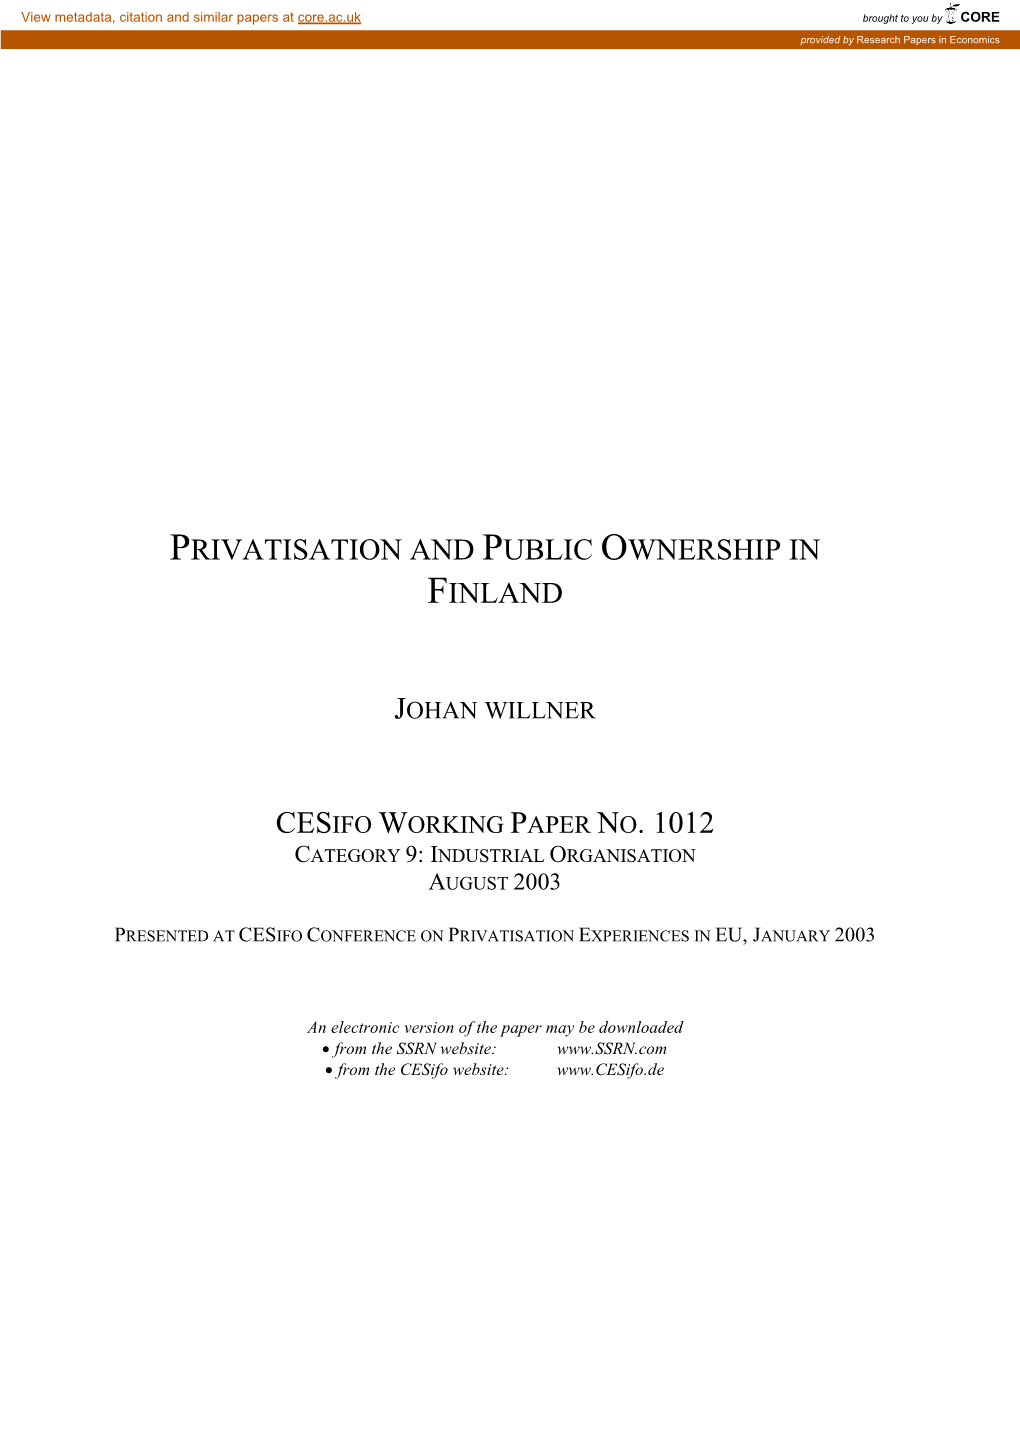 Privatisation and Public Ownership in Finland